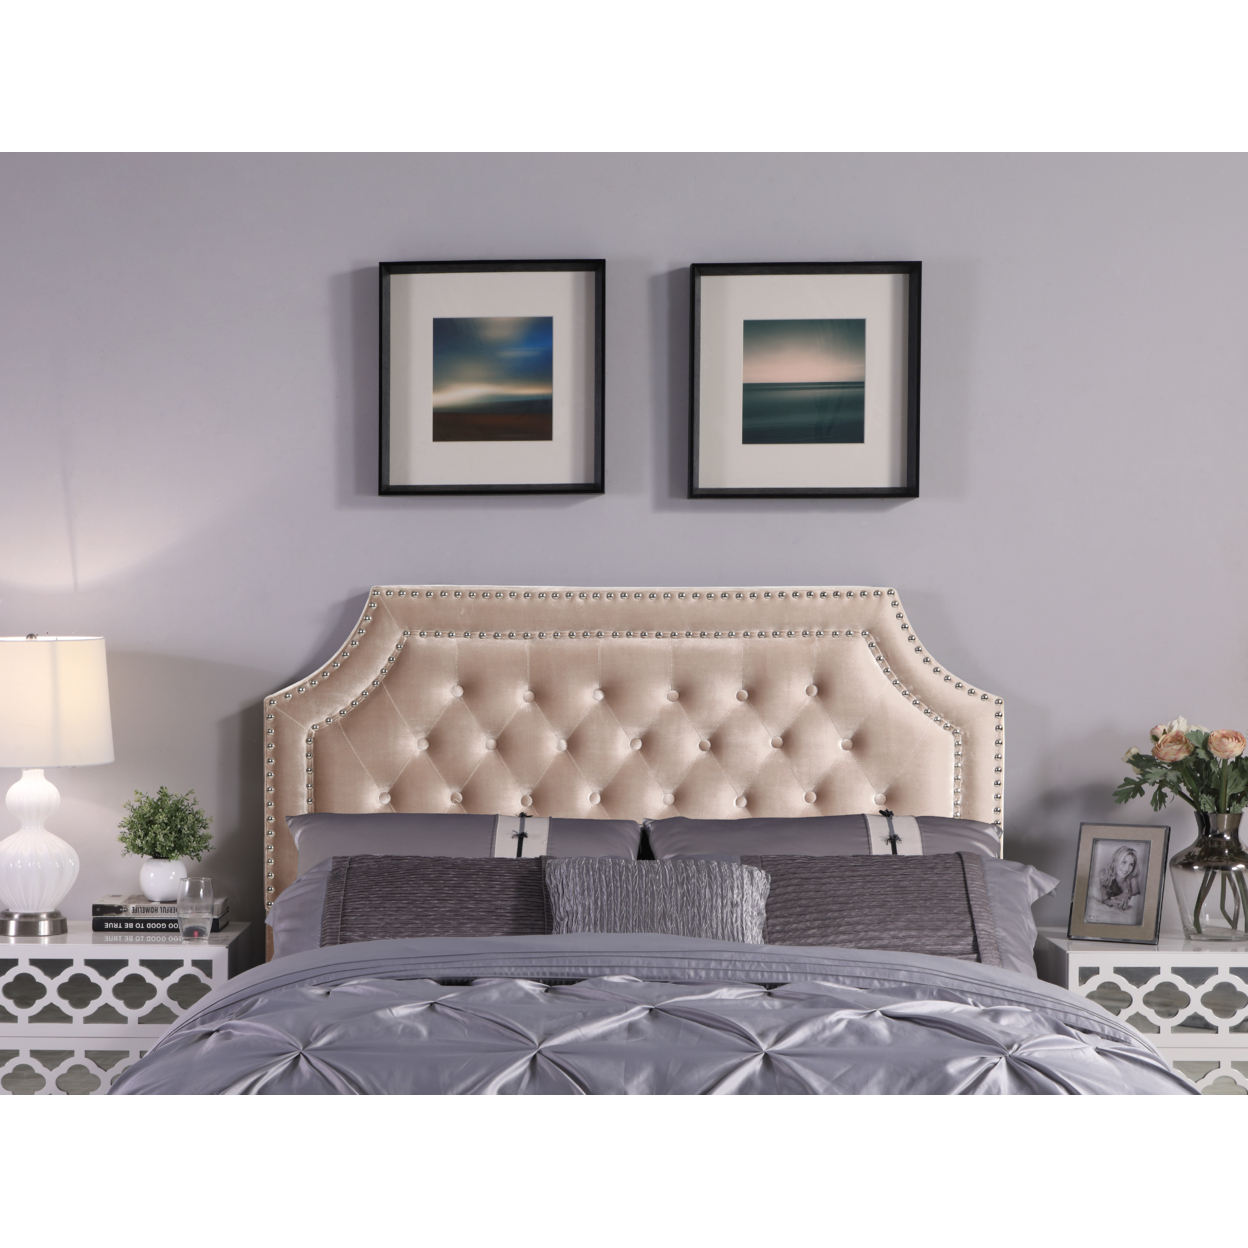 Horus Headboard Velvet Upholstered Button Tufted Double Row Silver Nailhead Trim - Taupe, King